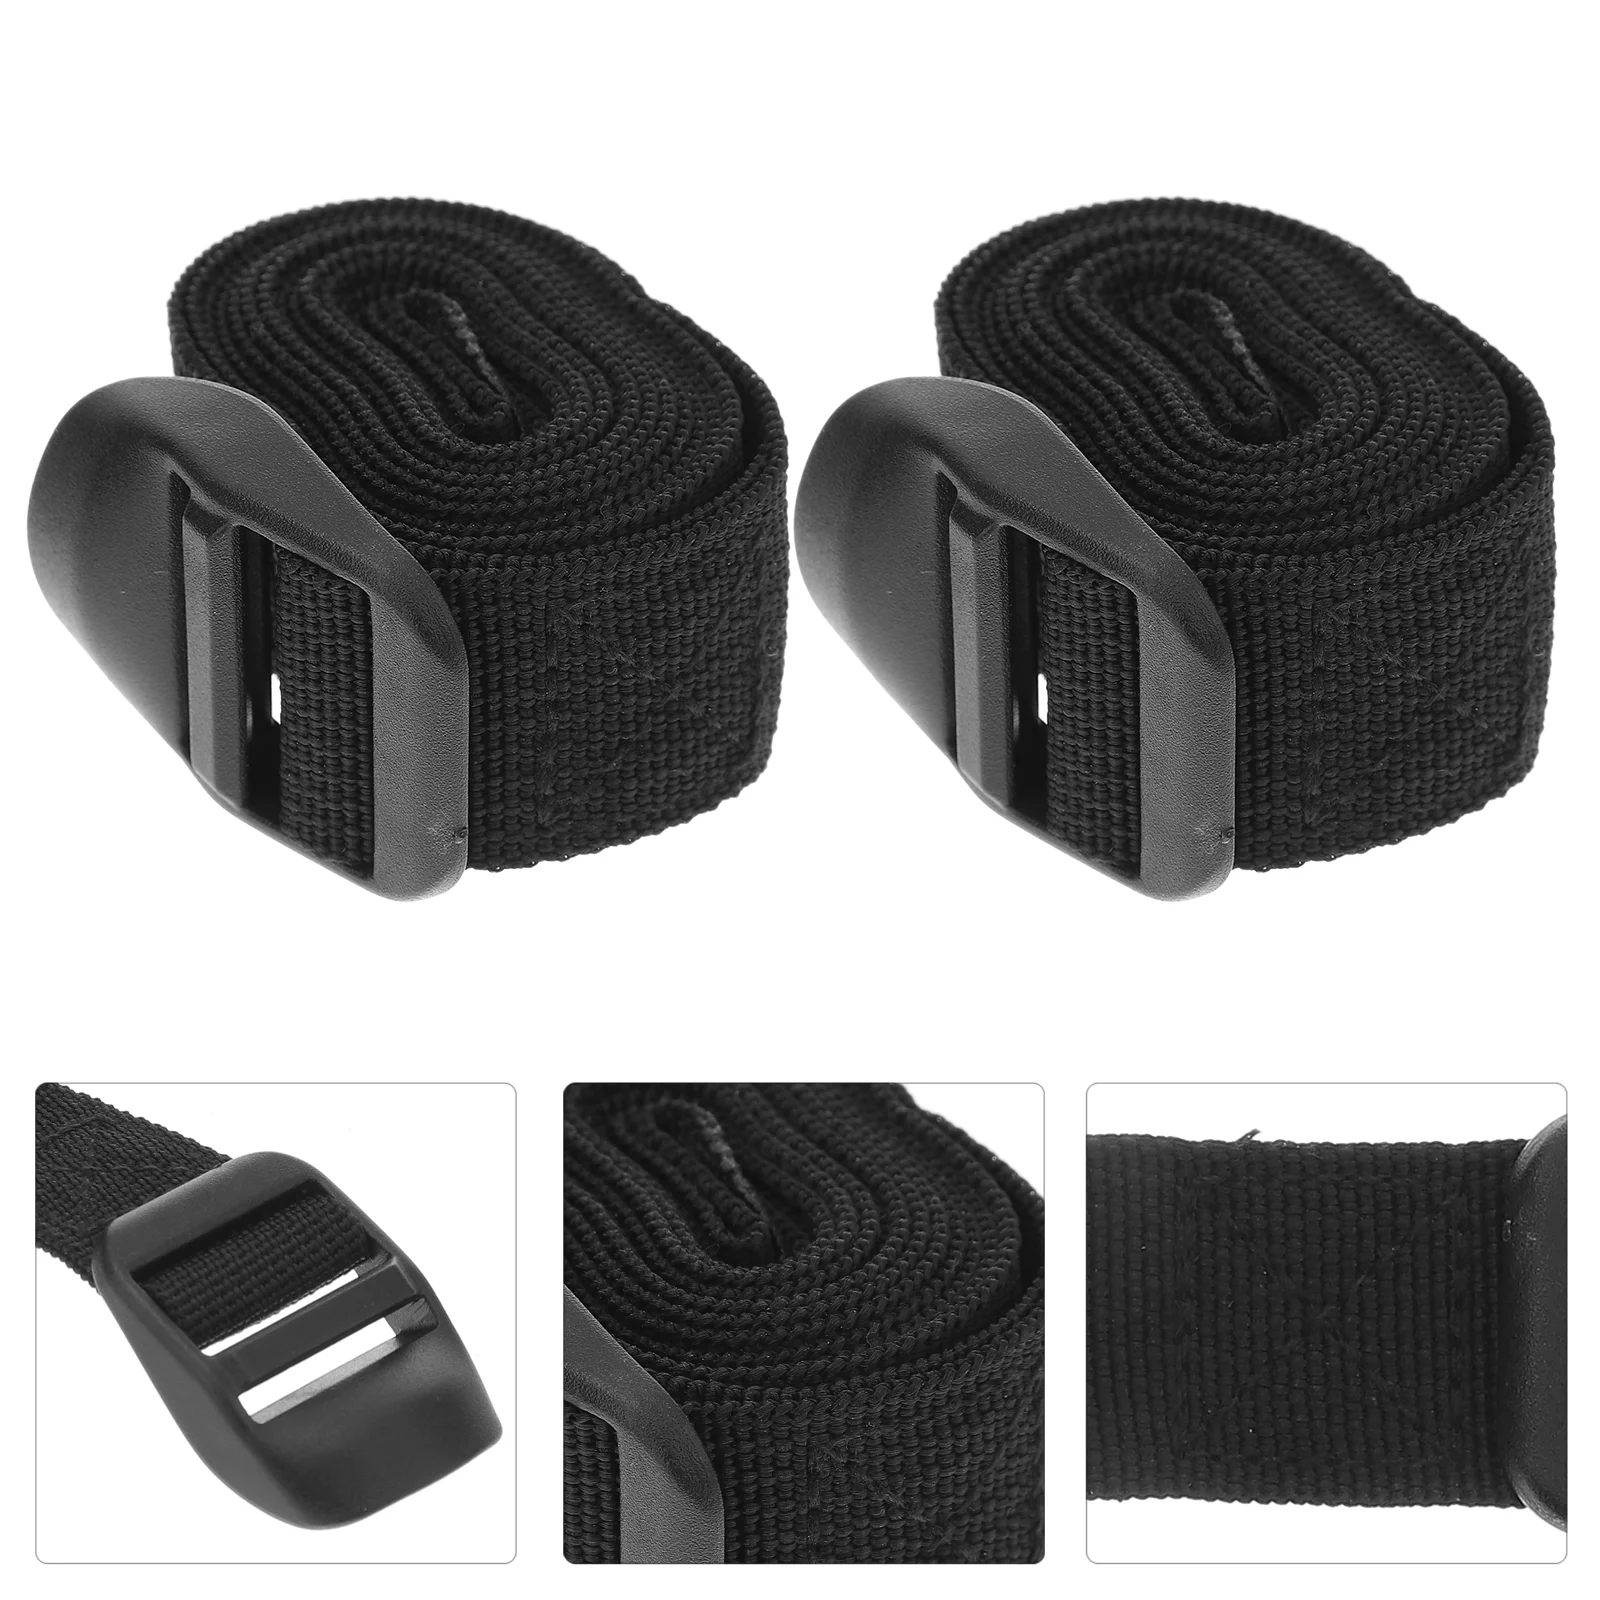 Baggage Belts 1.5m Practical Tie Down Strap Strong Ratchet Belt Suitcase Safety Strap Cargo Lashing with Press